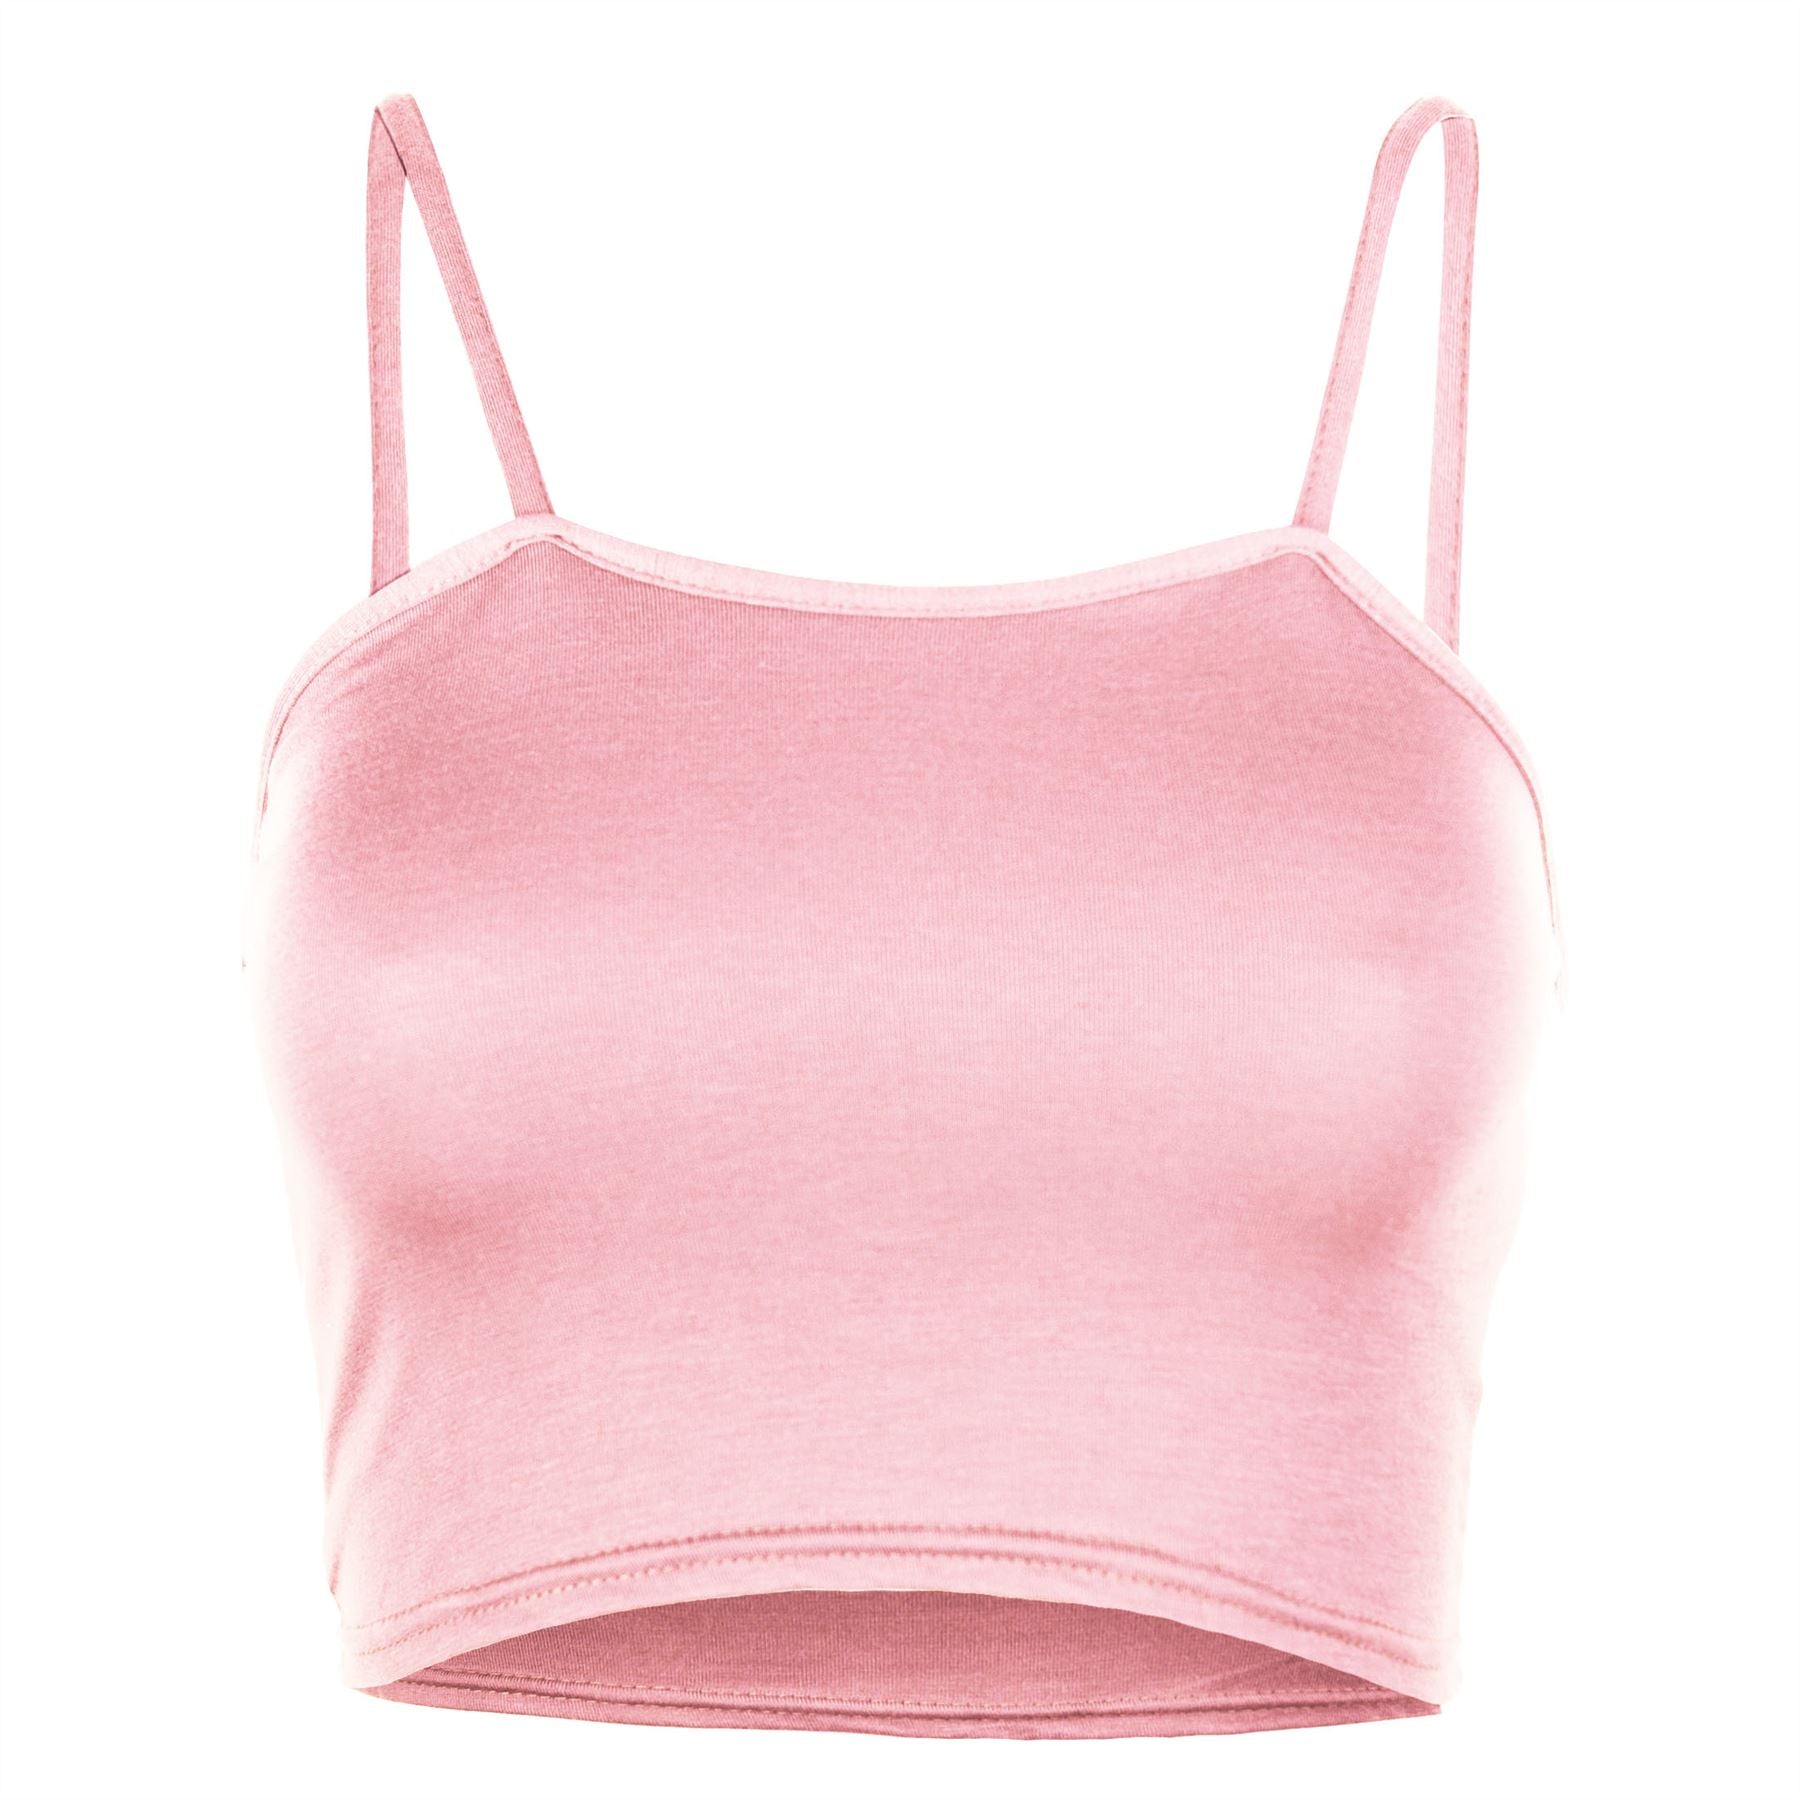 Carrieanne Strappy Cami Basic Jersey Crop Top